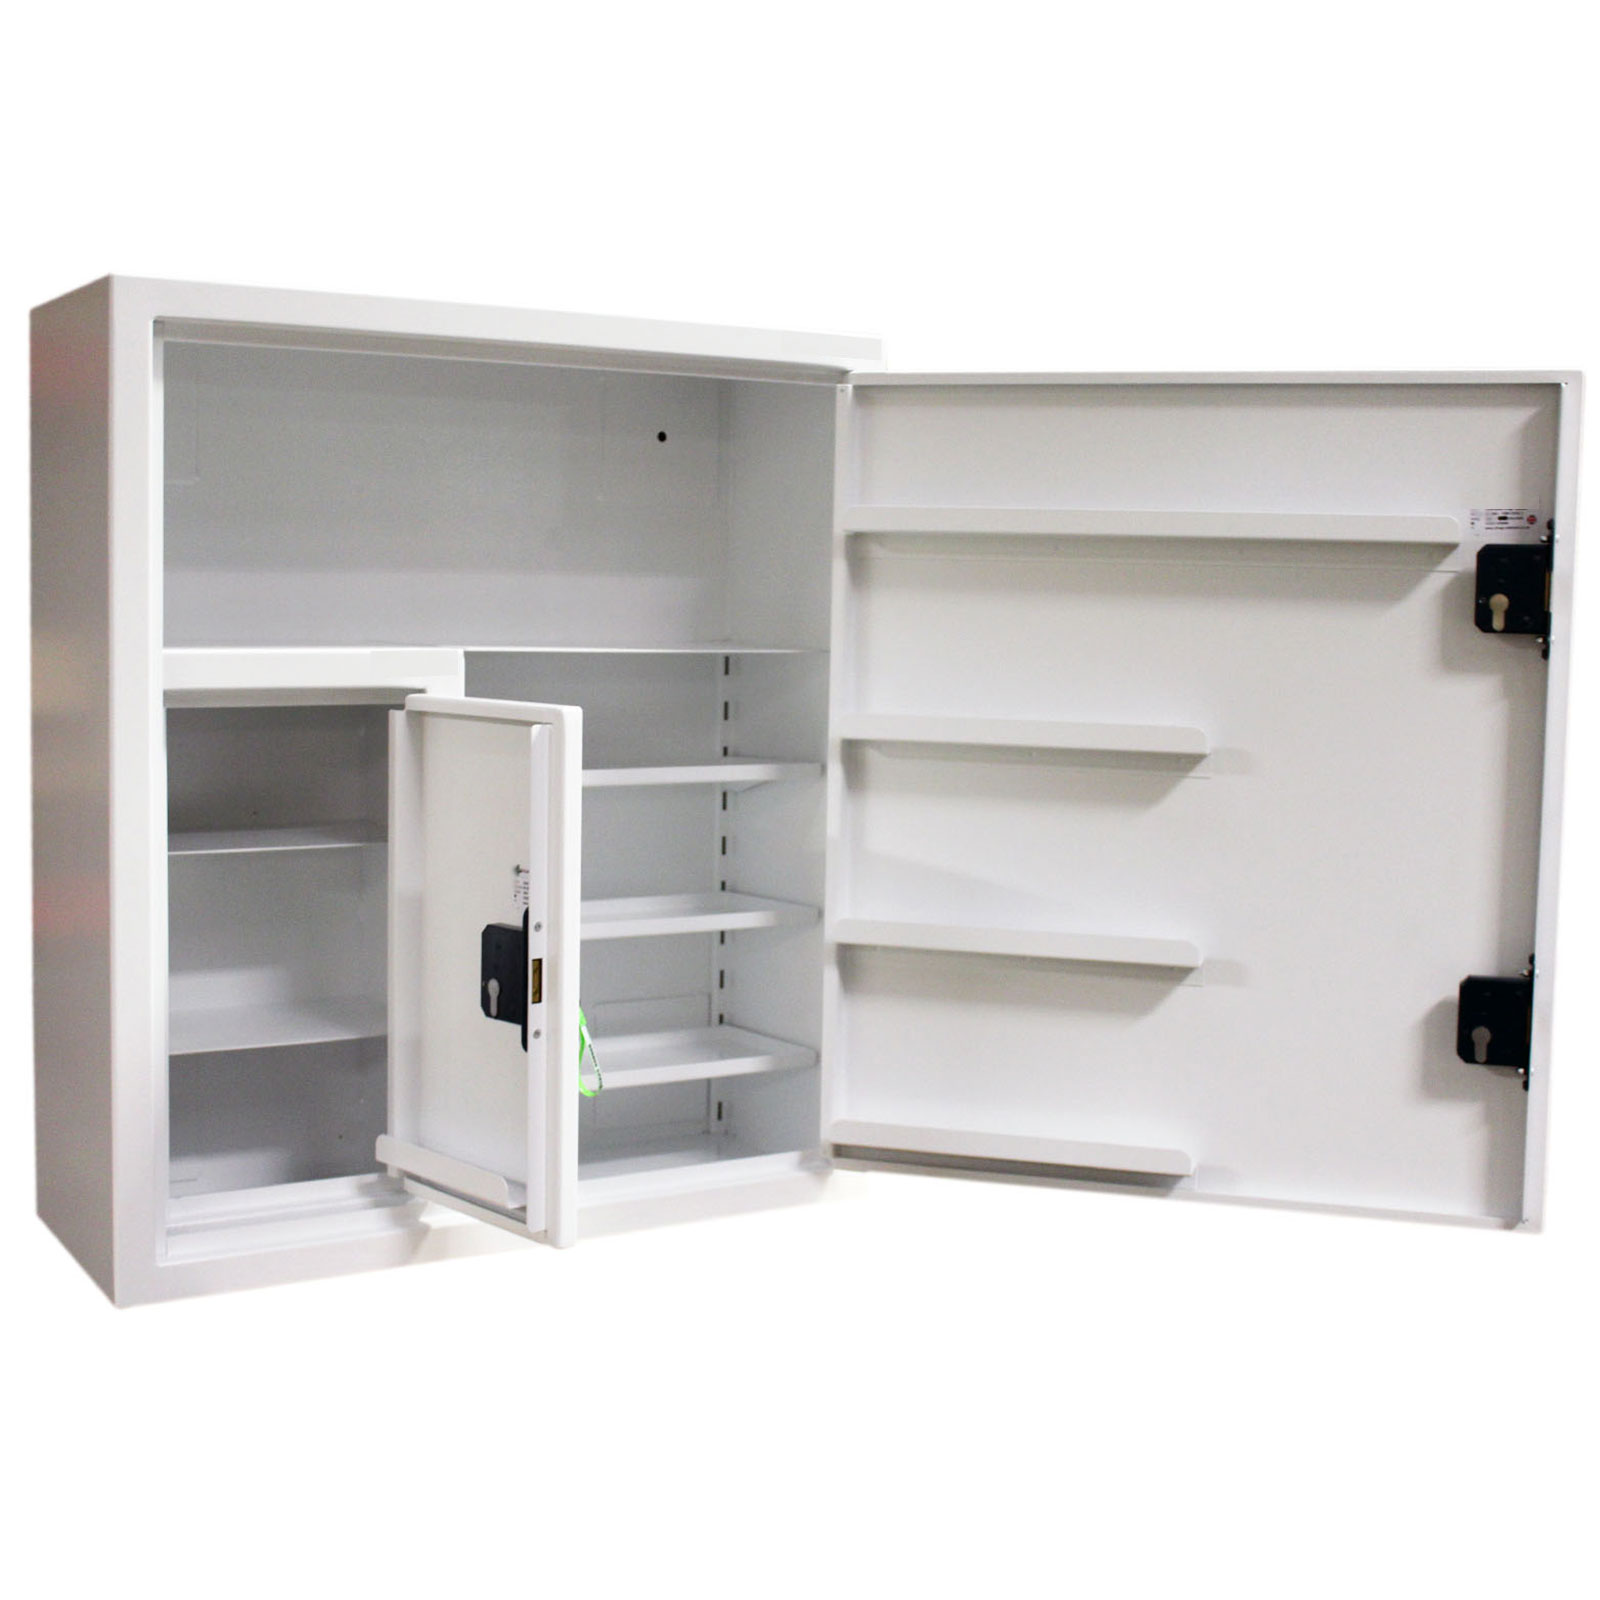 FPD 11292 controlled drug cabinet with inner door open